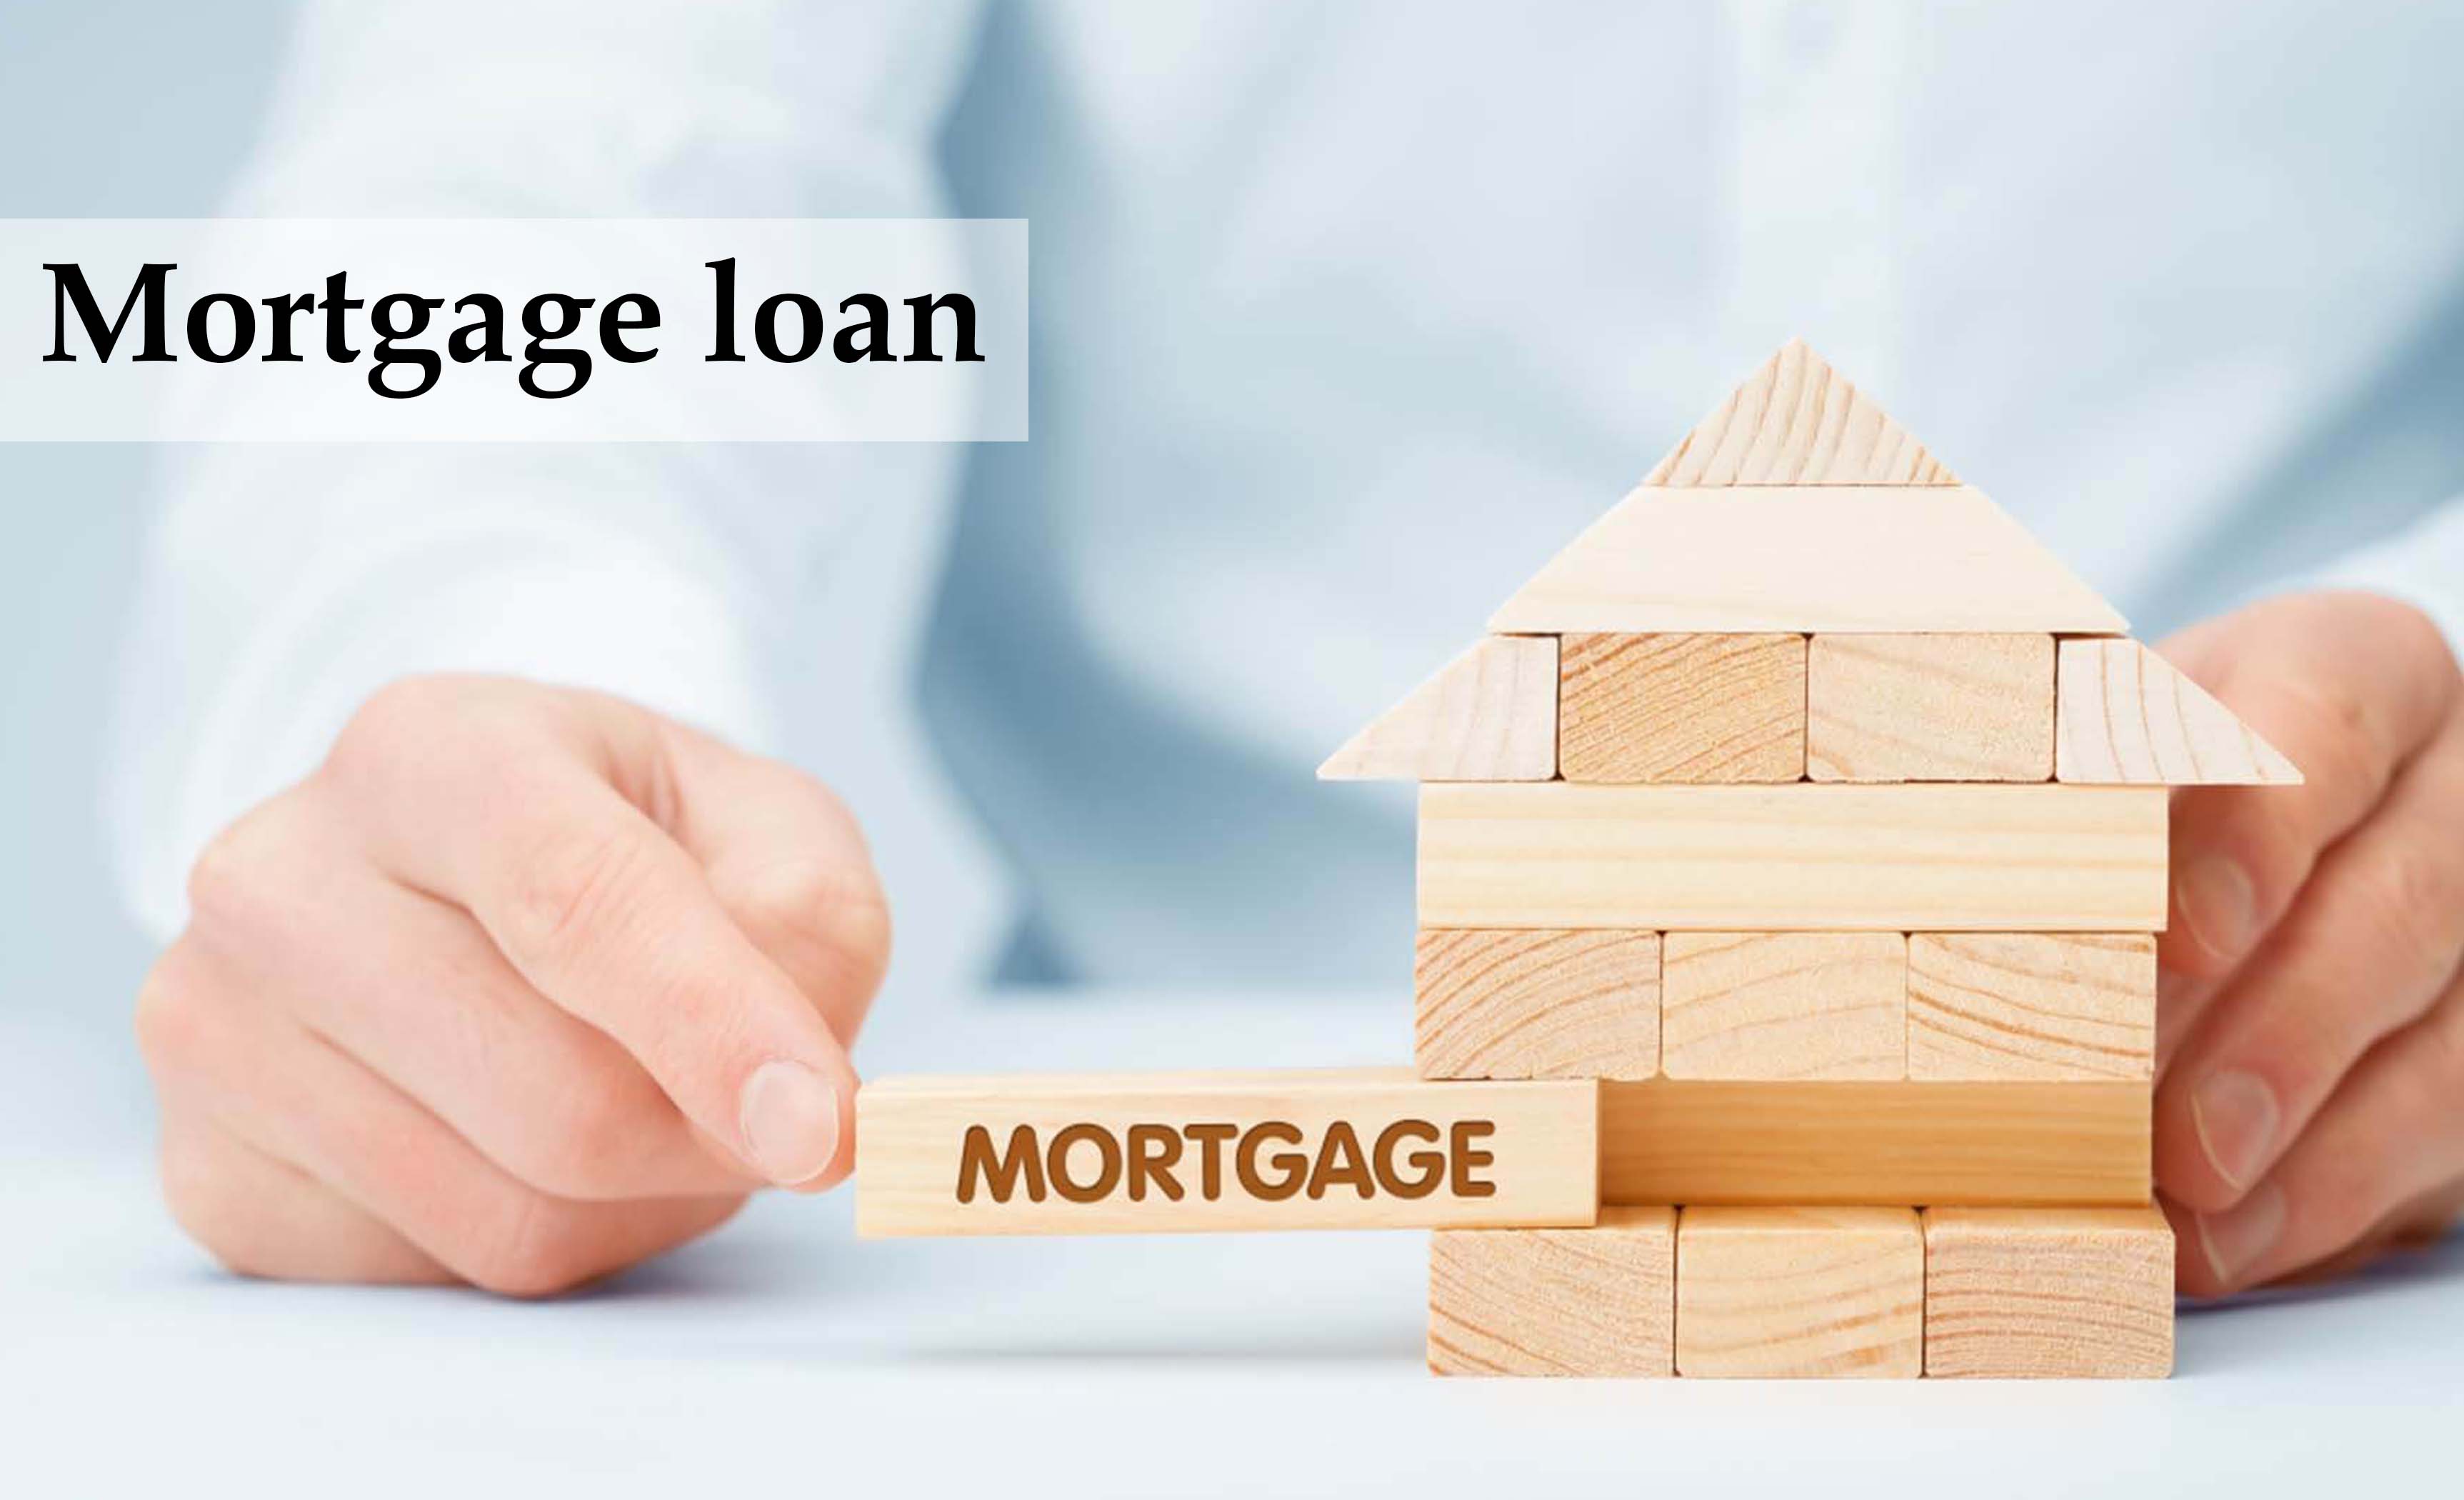 Mortgage loan - How to Qualify for a Mortgage?